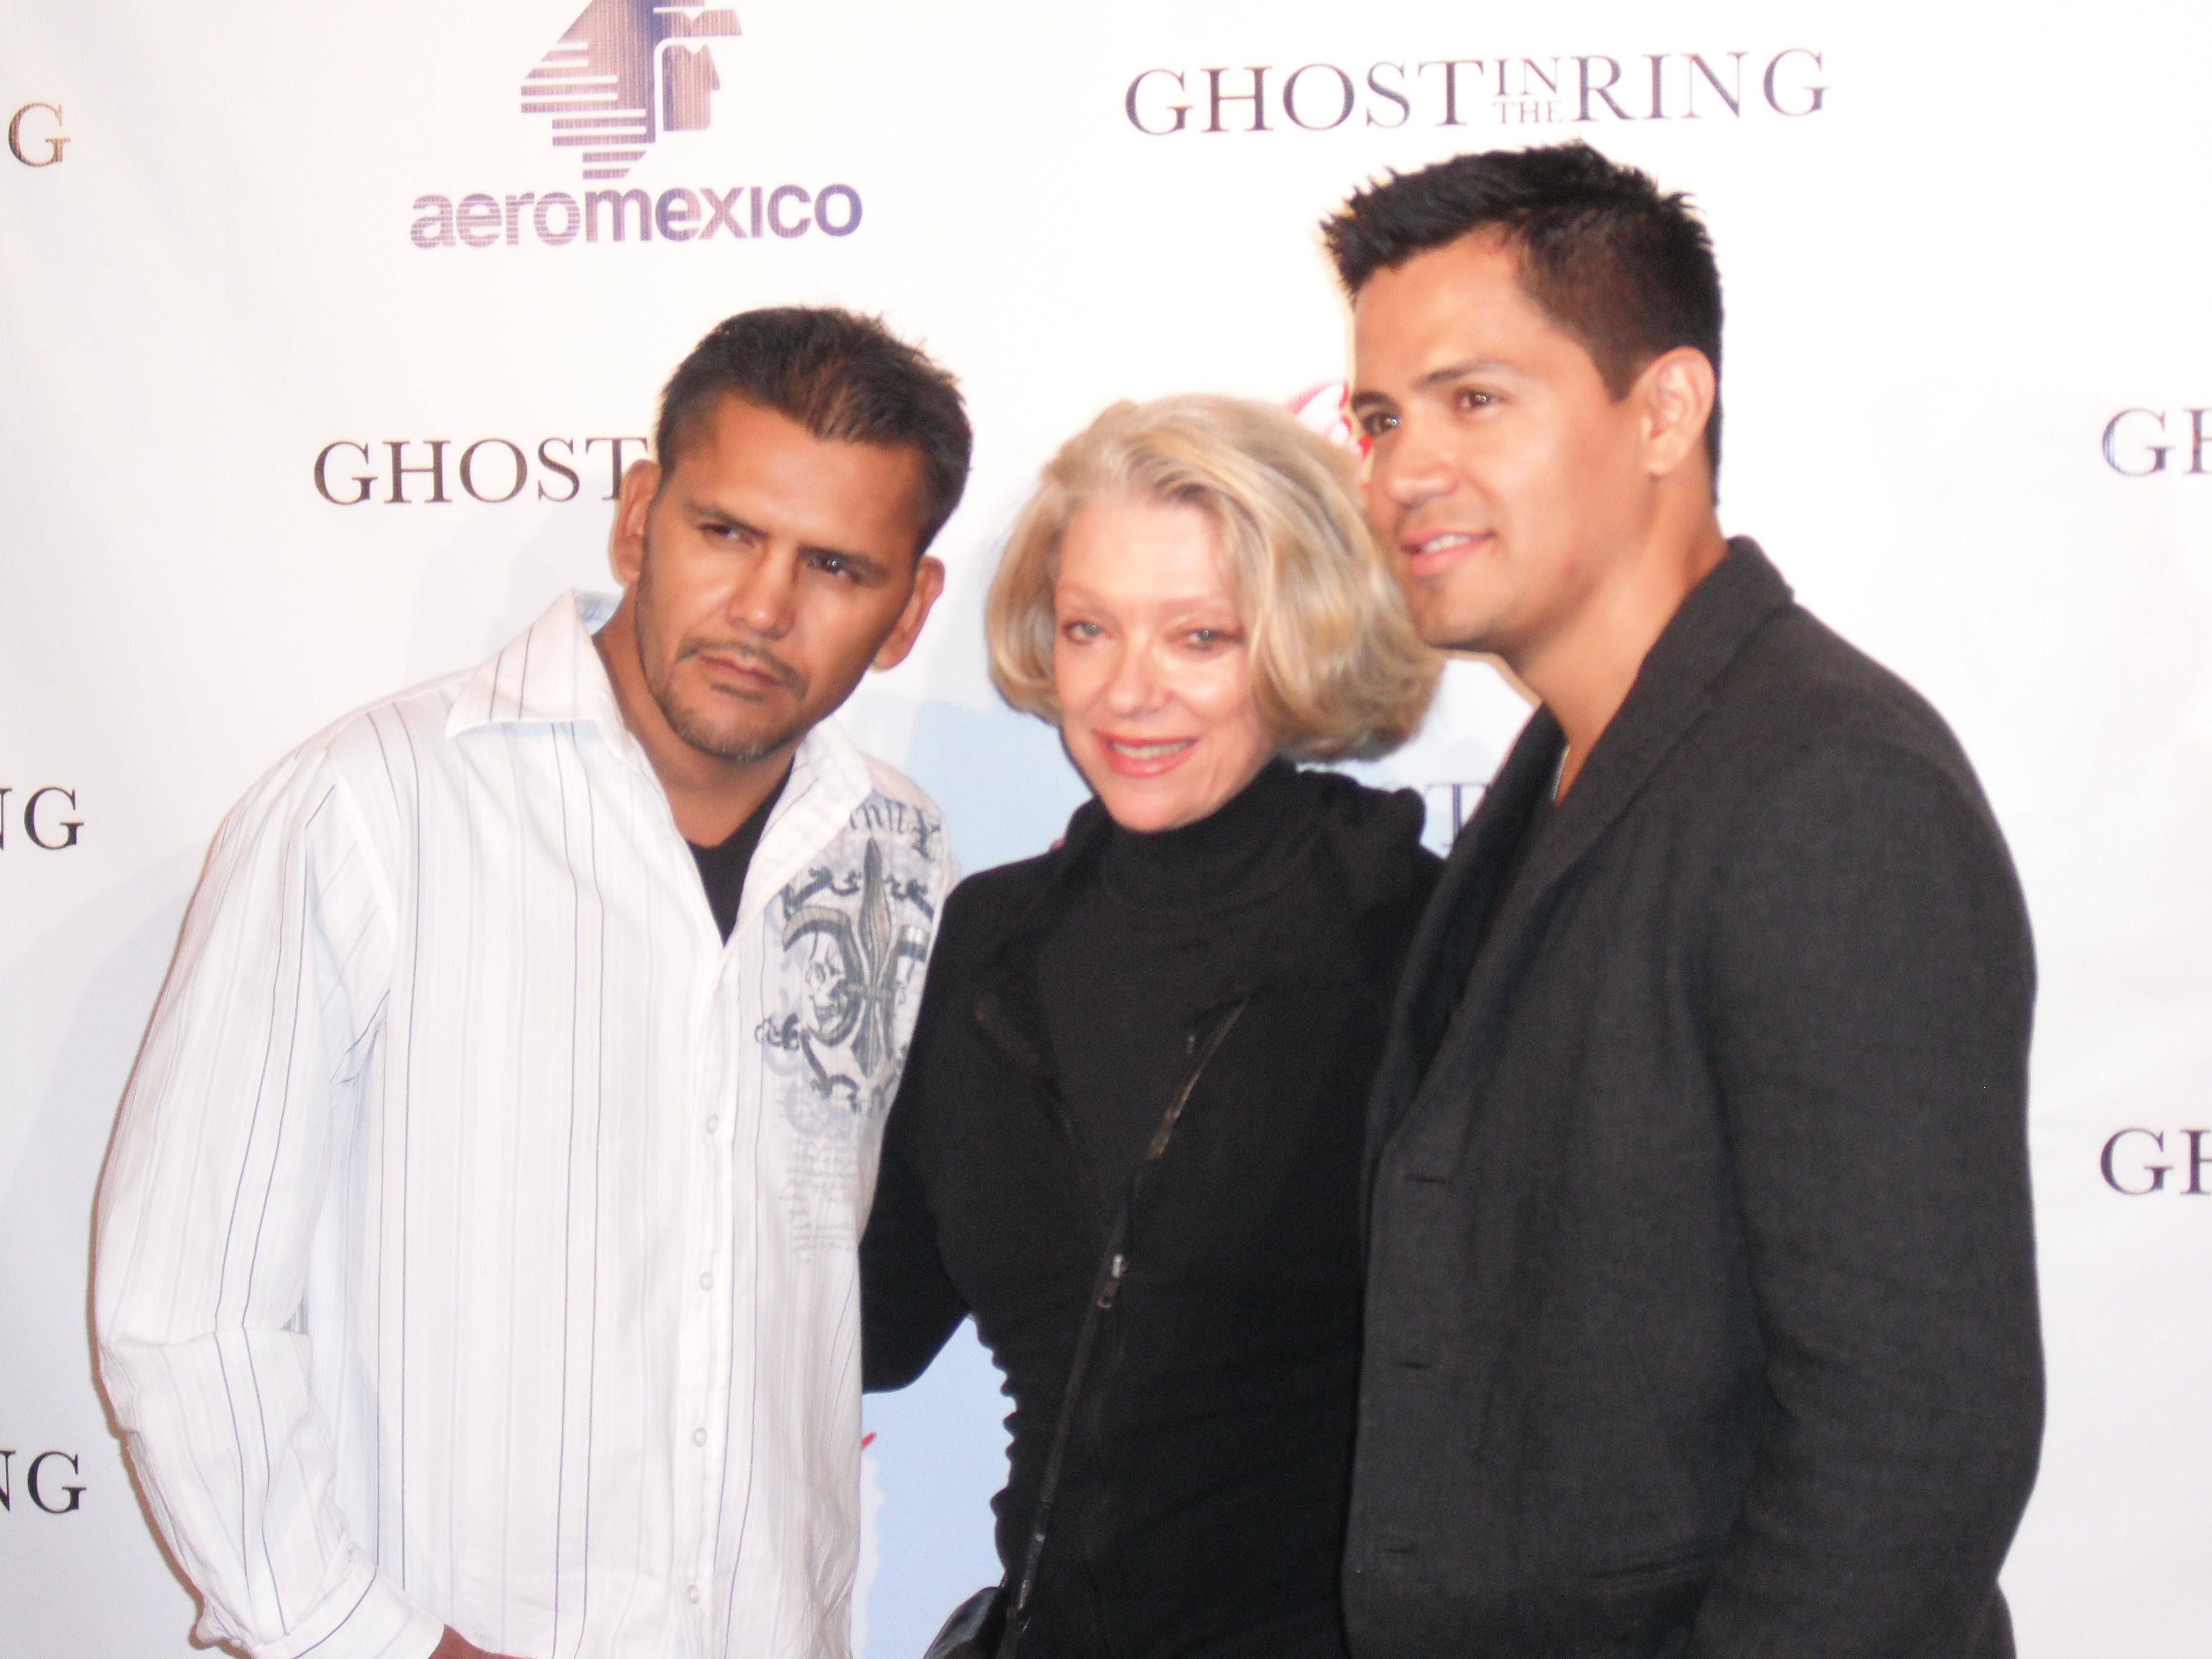 Gabriel Rueles, Betty Kaplan and Jay Hernandez at GHOST IN THE RING party September 2010